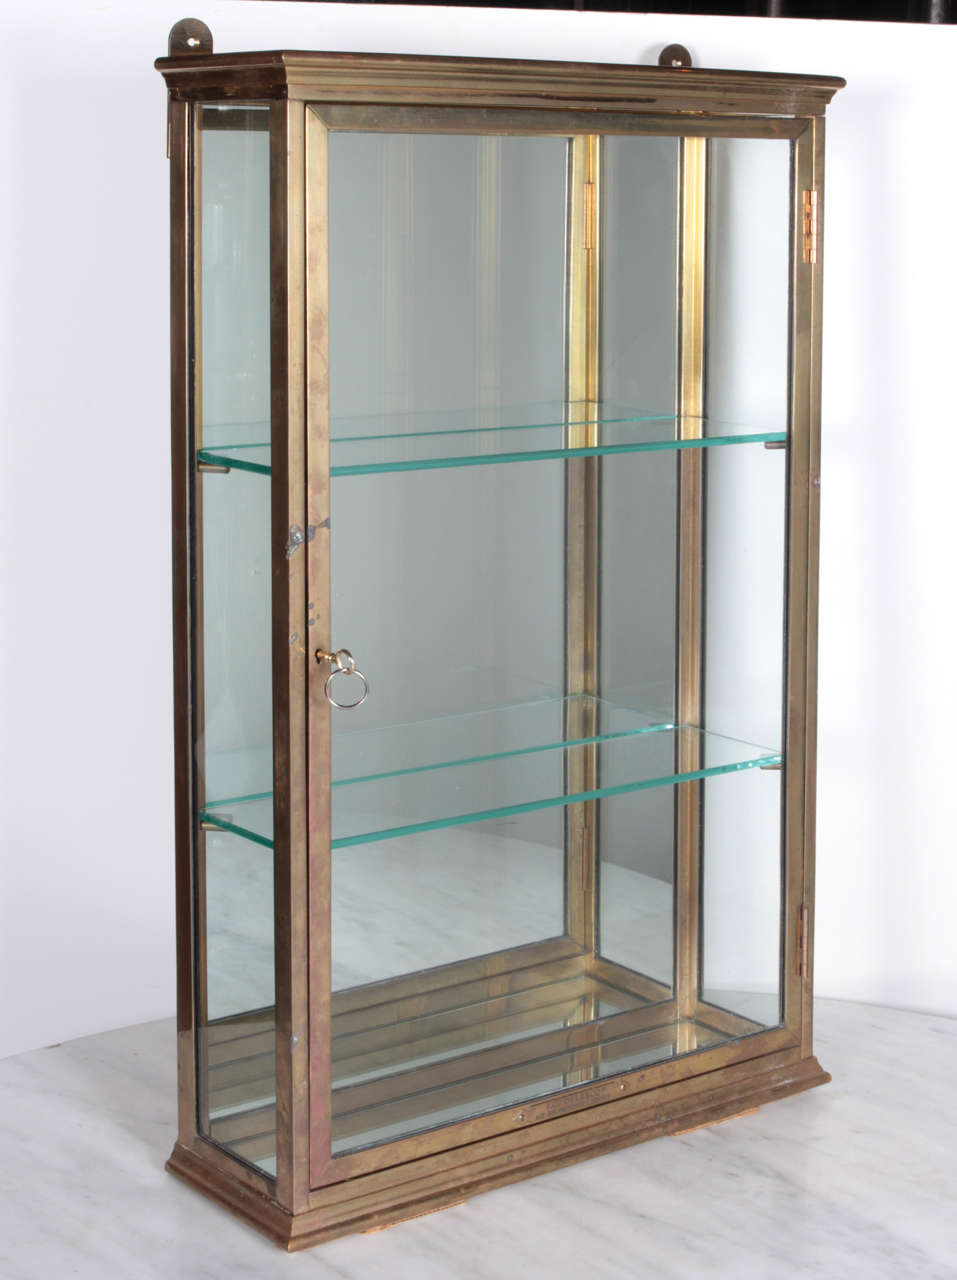 Exceptionally fine and rare bronze wall cabinet with mirrored back and glass shelves.  Made in Provence, France circa 1900.  With original key and working lock mechanism.  Perfect for an elegant bathroom.